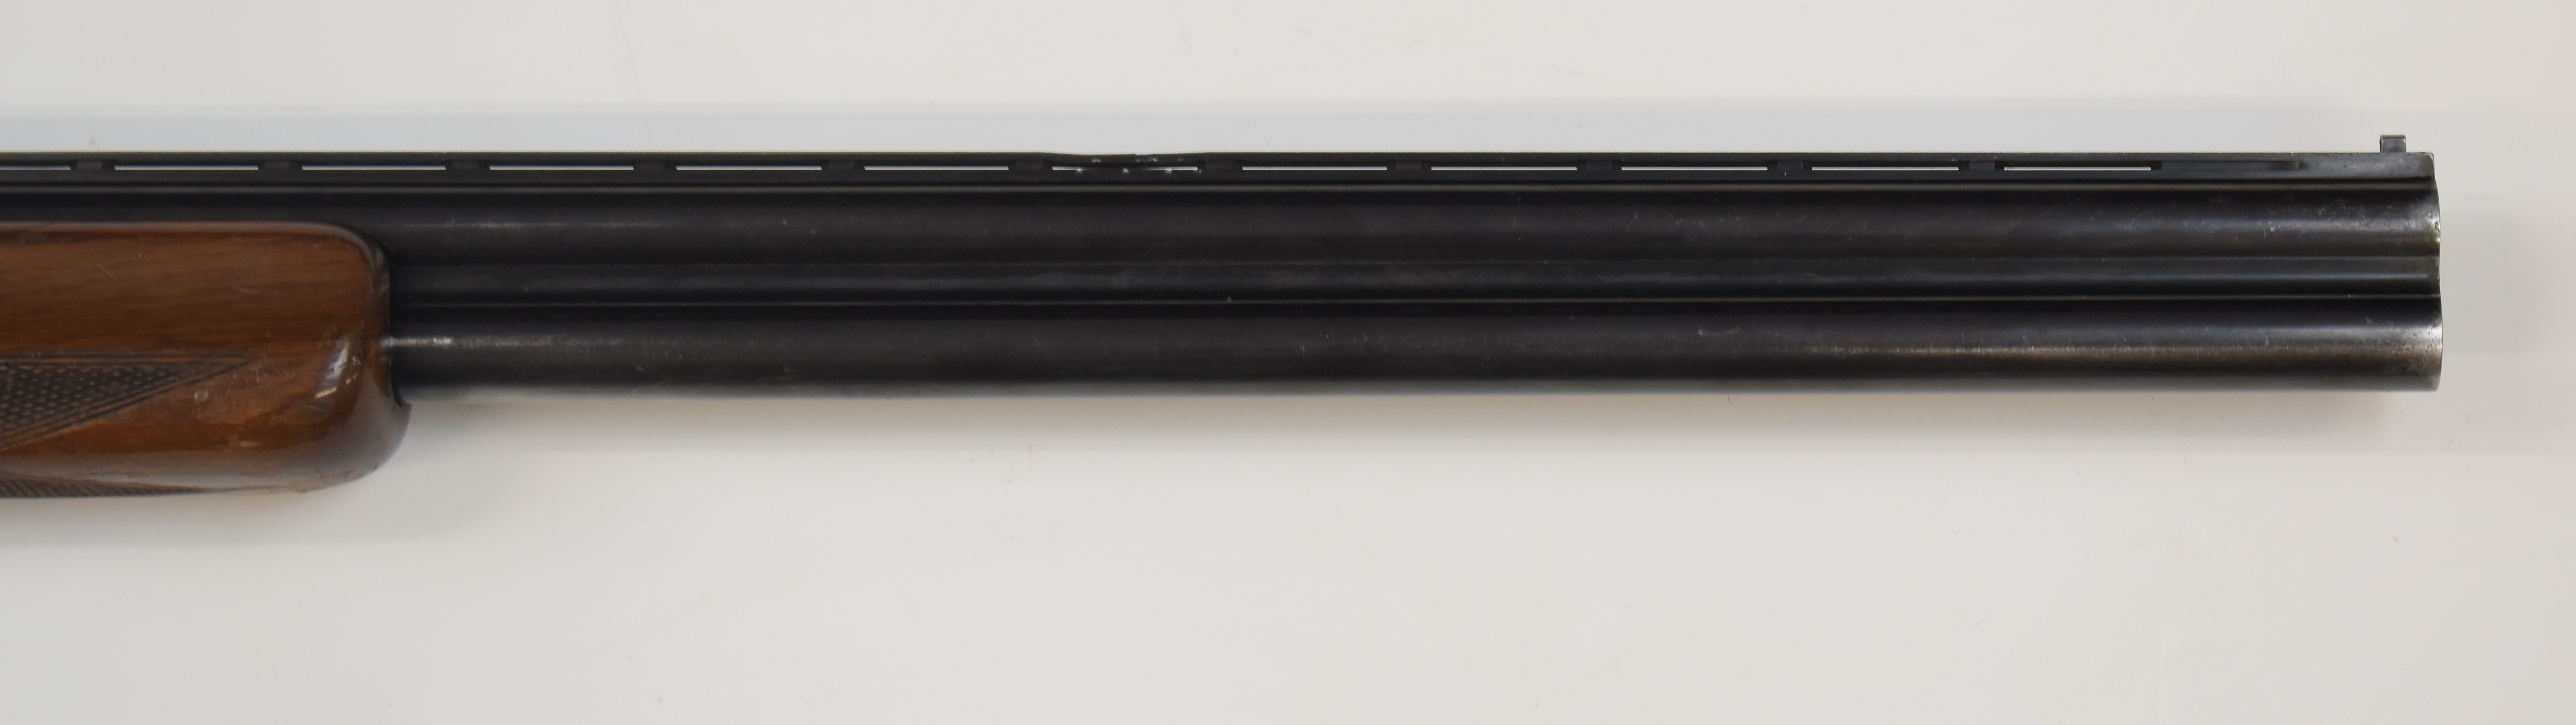 Browning Citori 12 bore over and under ejector shotgun with named underside, chequered semi-pistol - Image 5 of 10